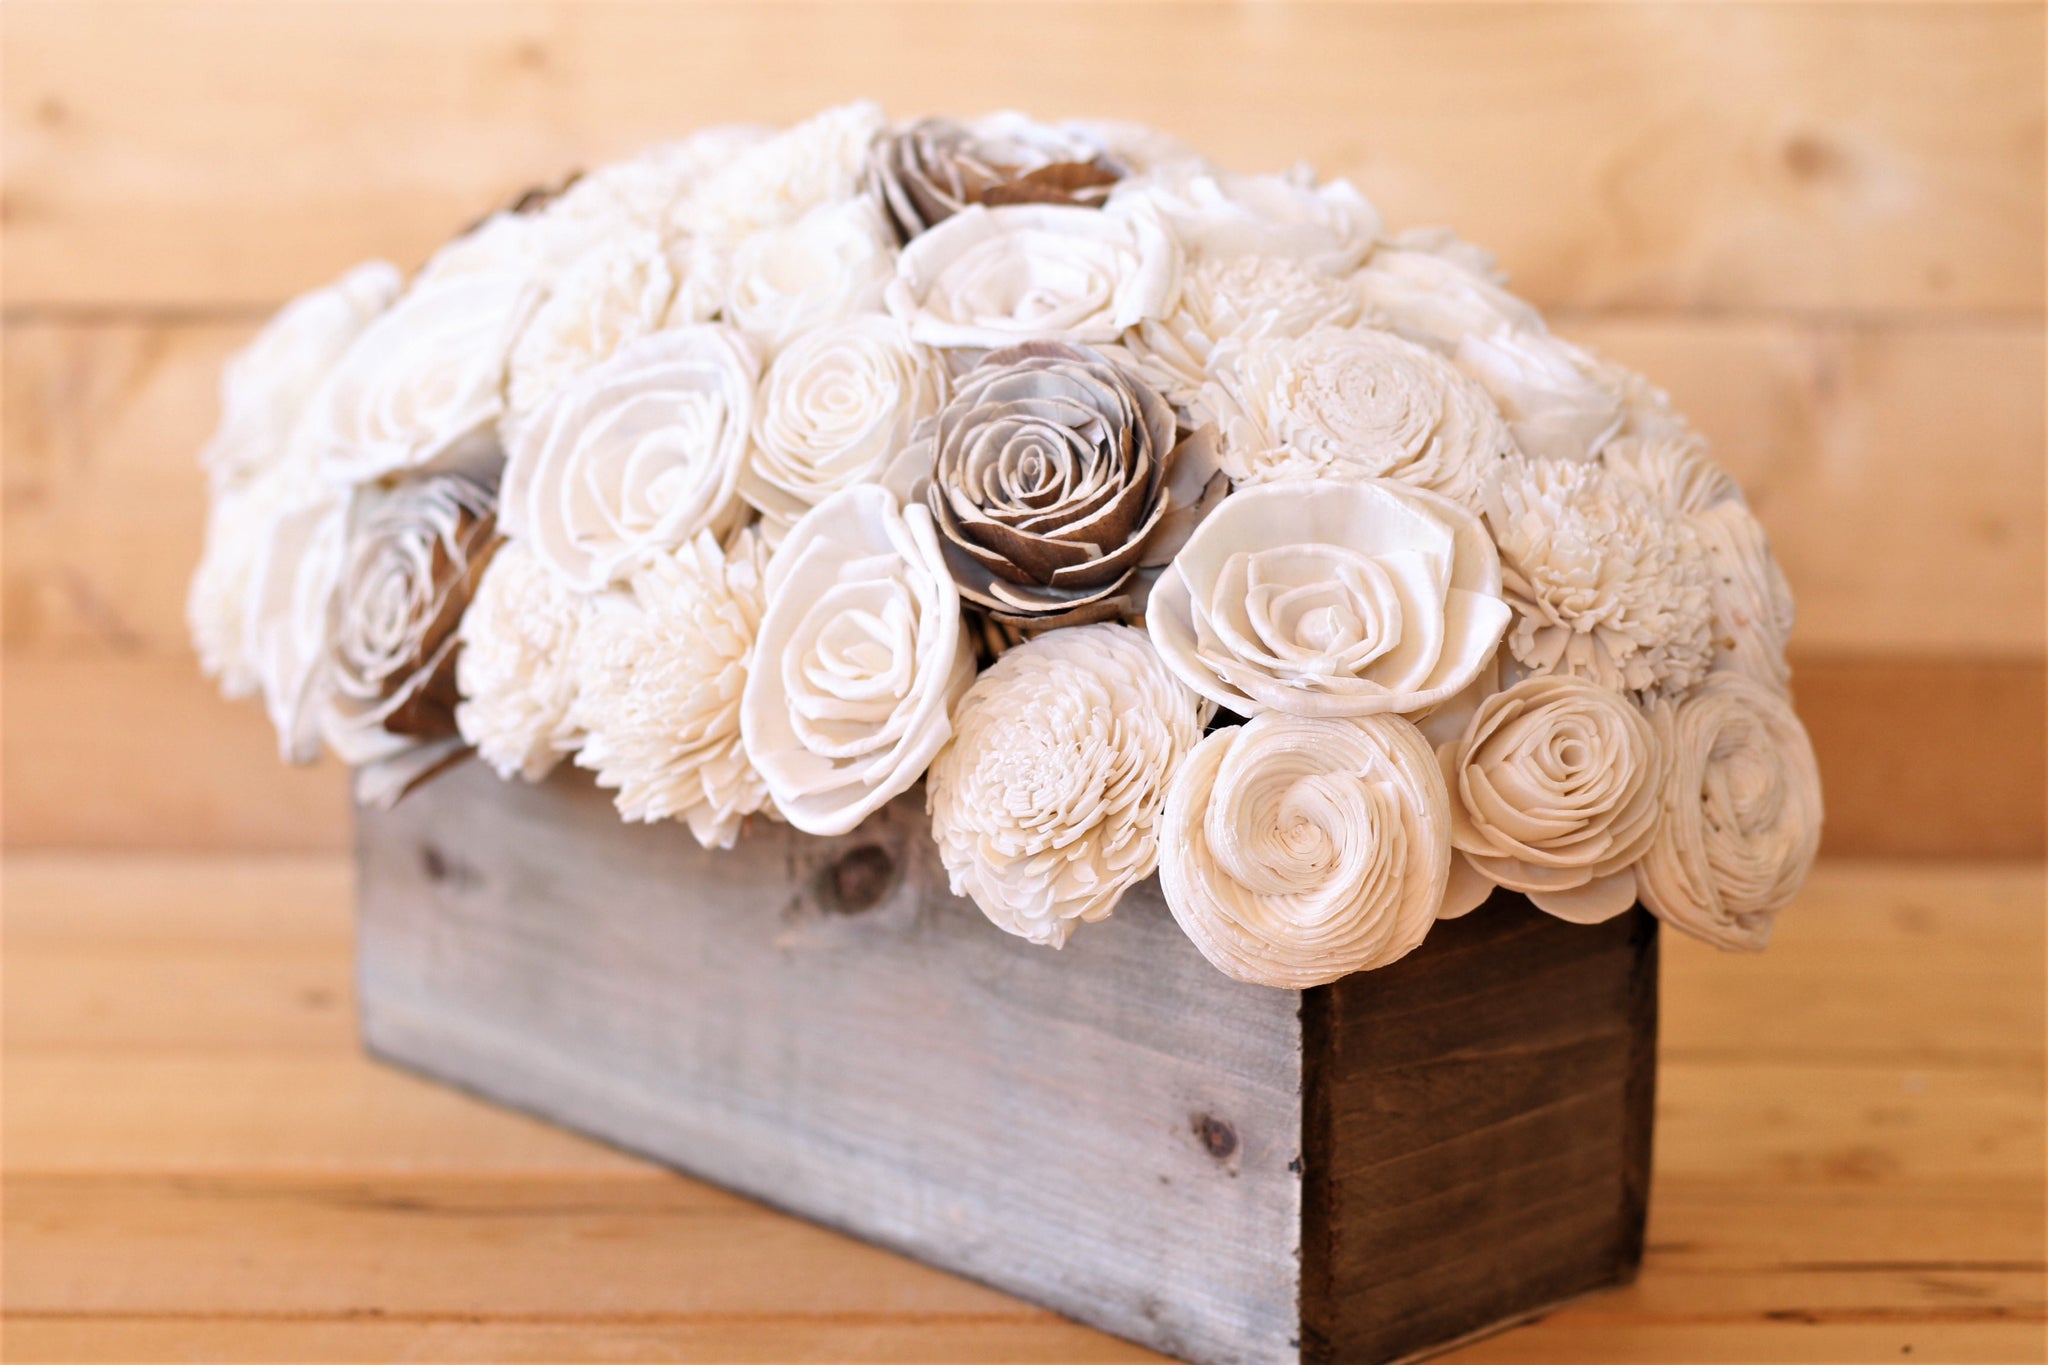 These DIY Wood Block Centerpieces Are Simply Stunning!